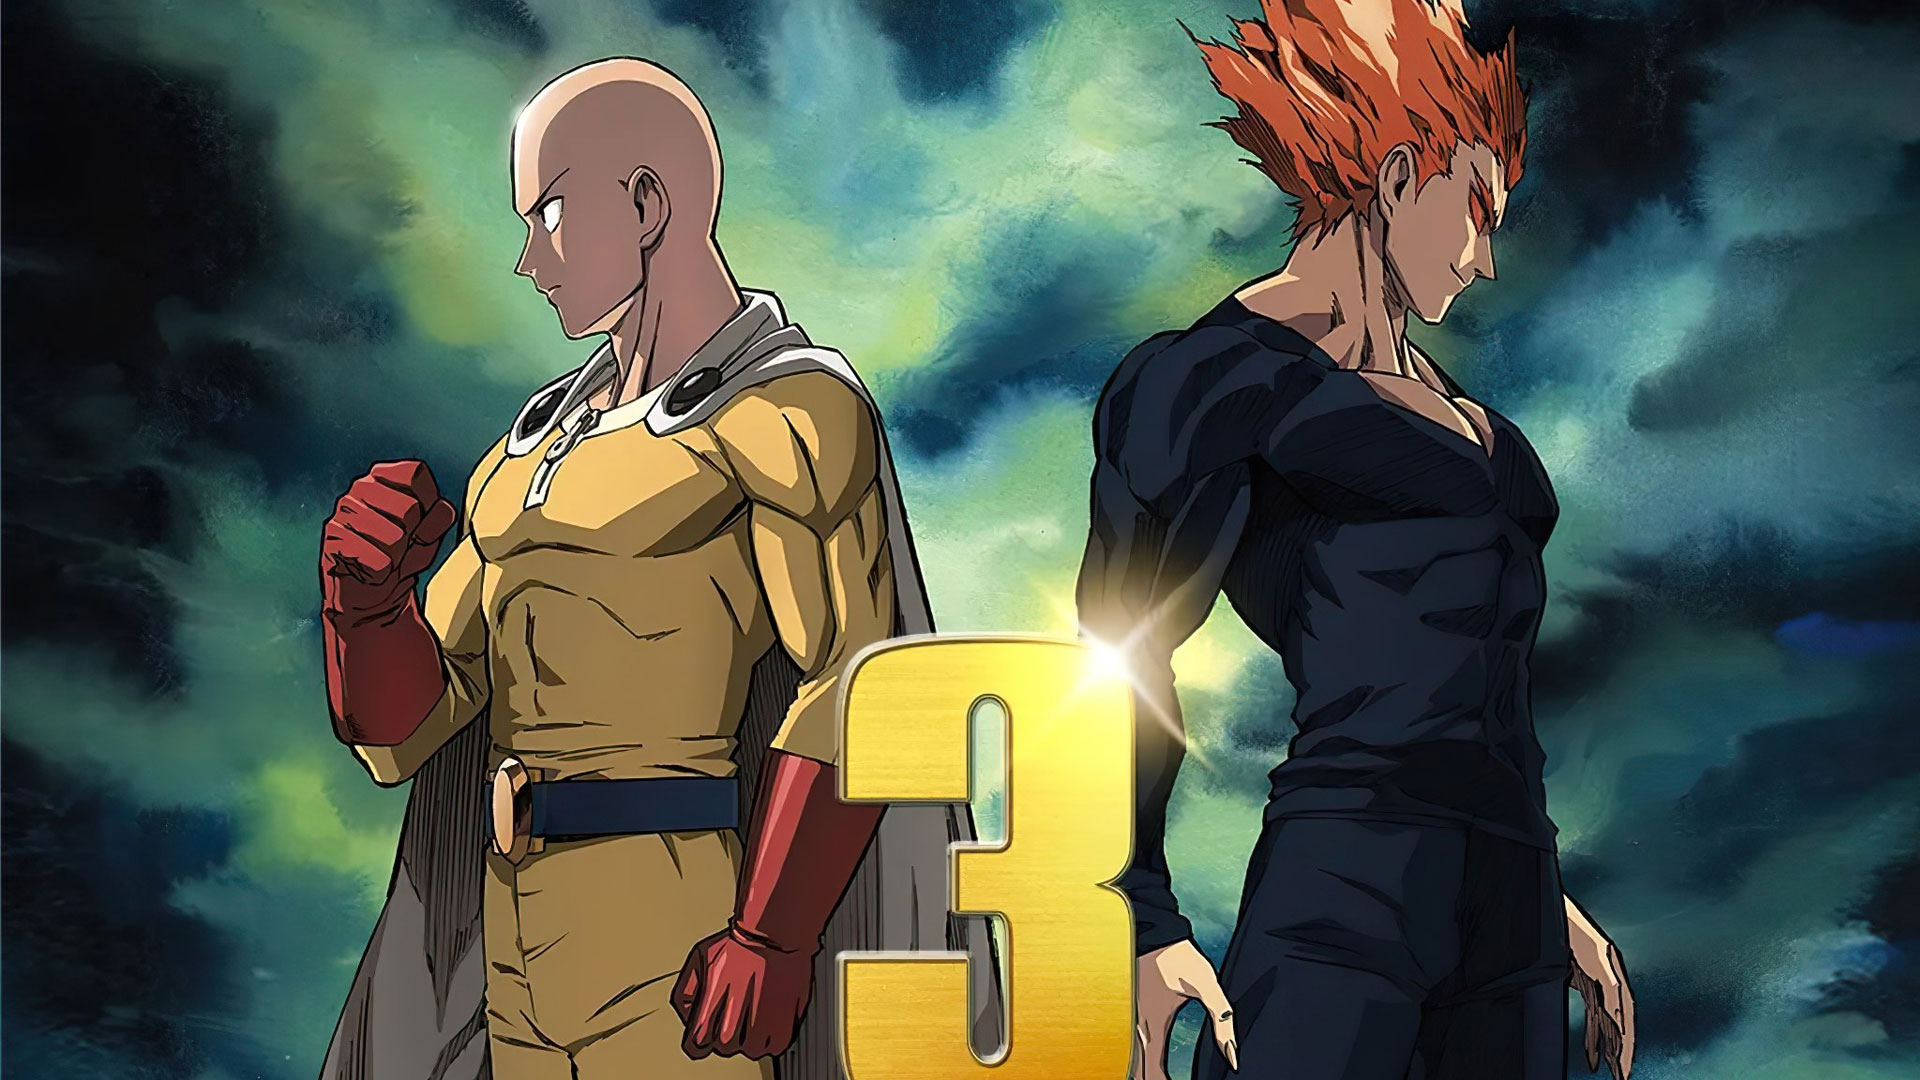 One Punch Man Season 3 Was Announced Almost 2 Years Ago. Where is It?